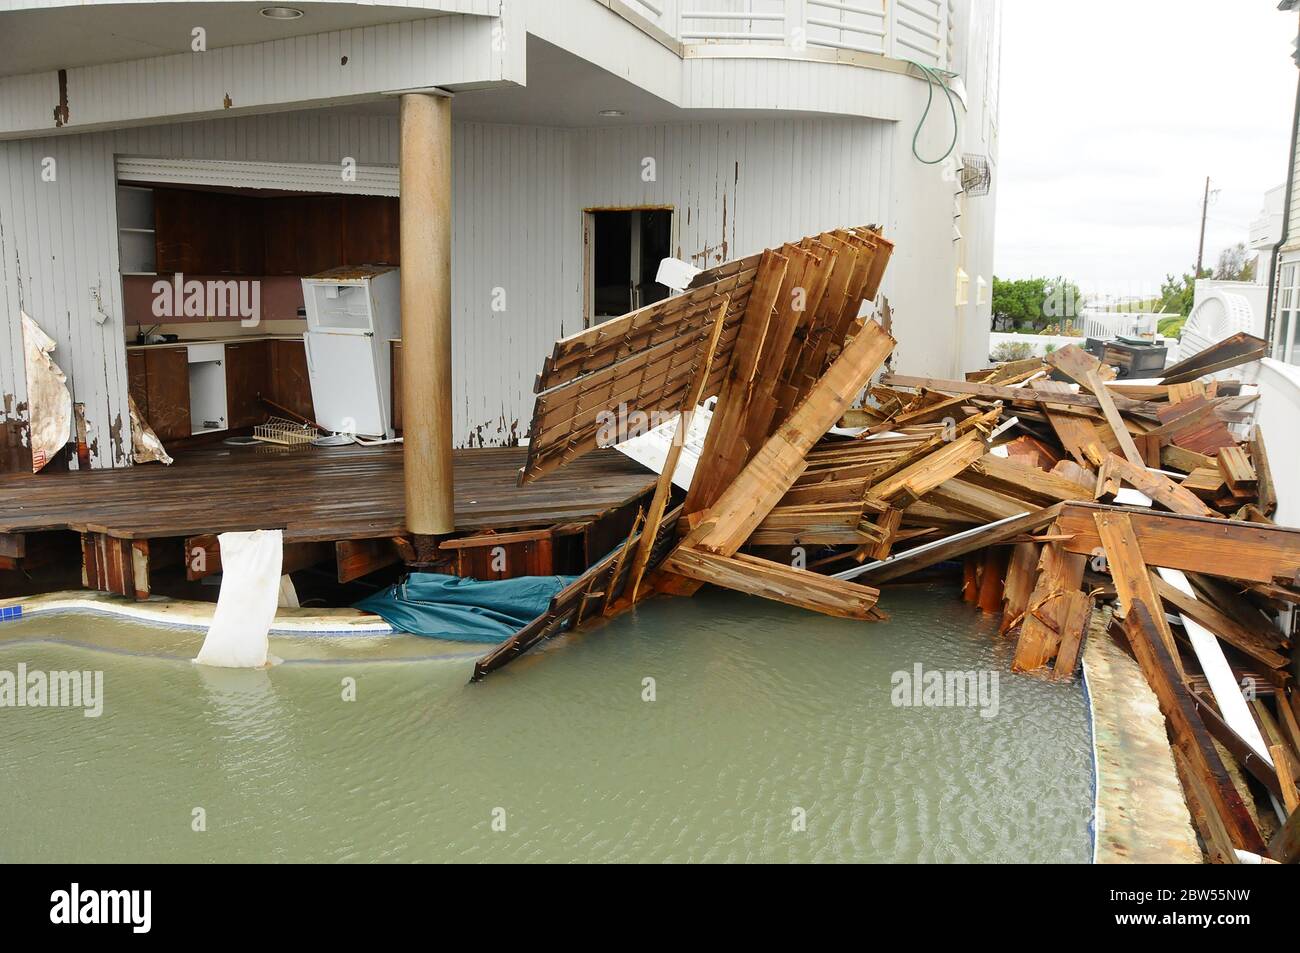 House is devastated by a hurricane that forced the ocean through the house. Deck is ripped up as well as the interior destroyed. Stock Photo